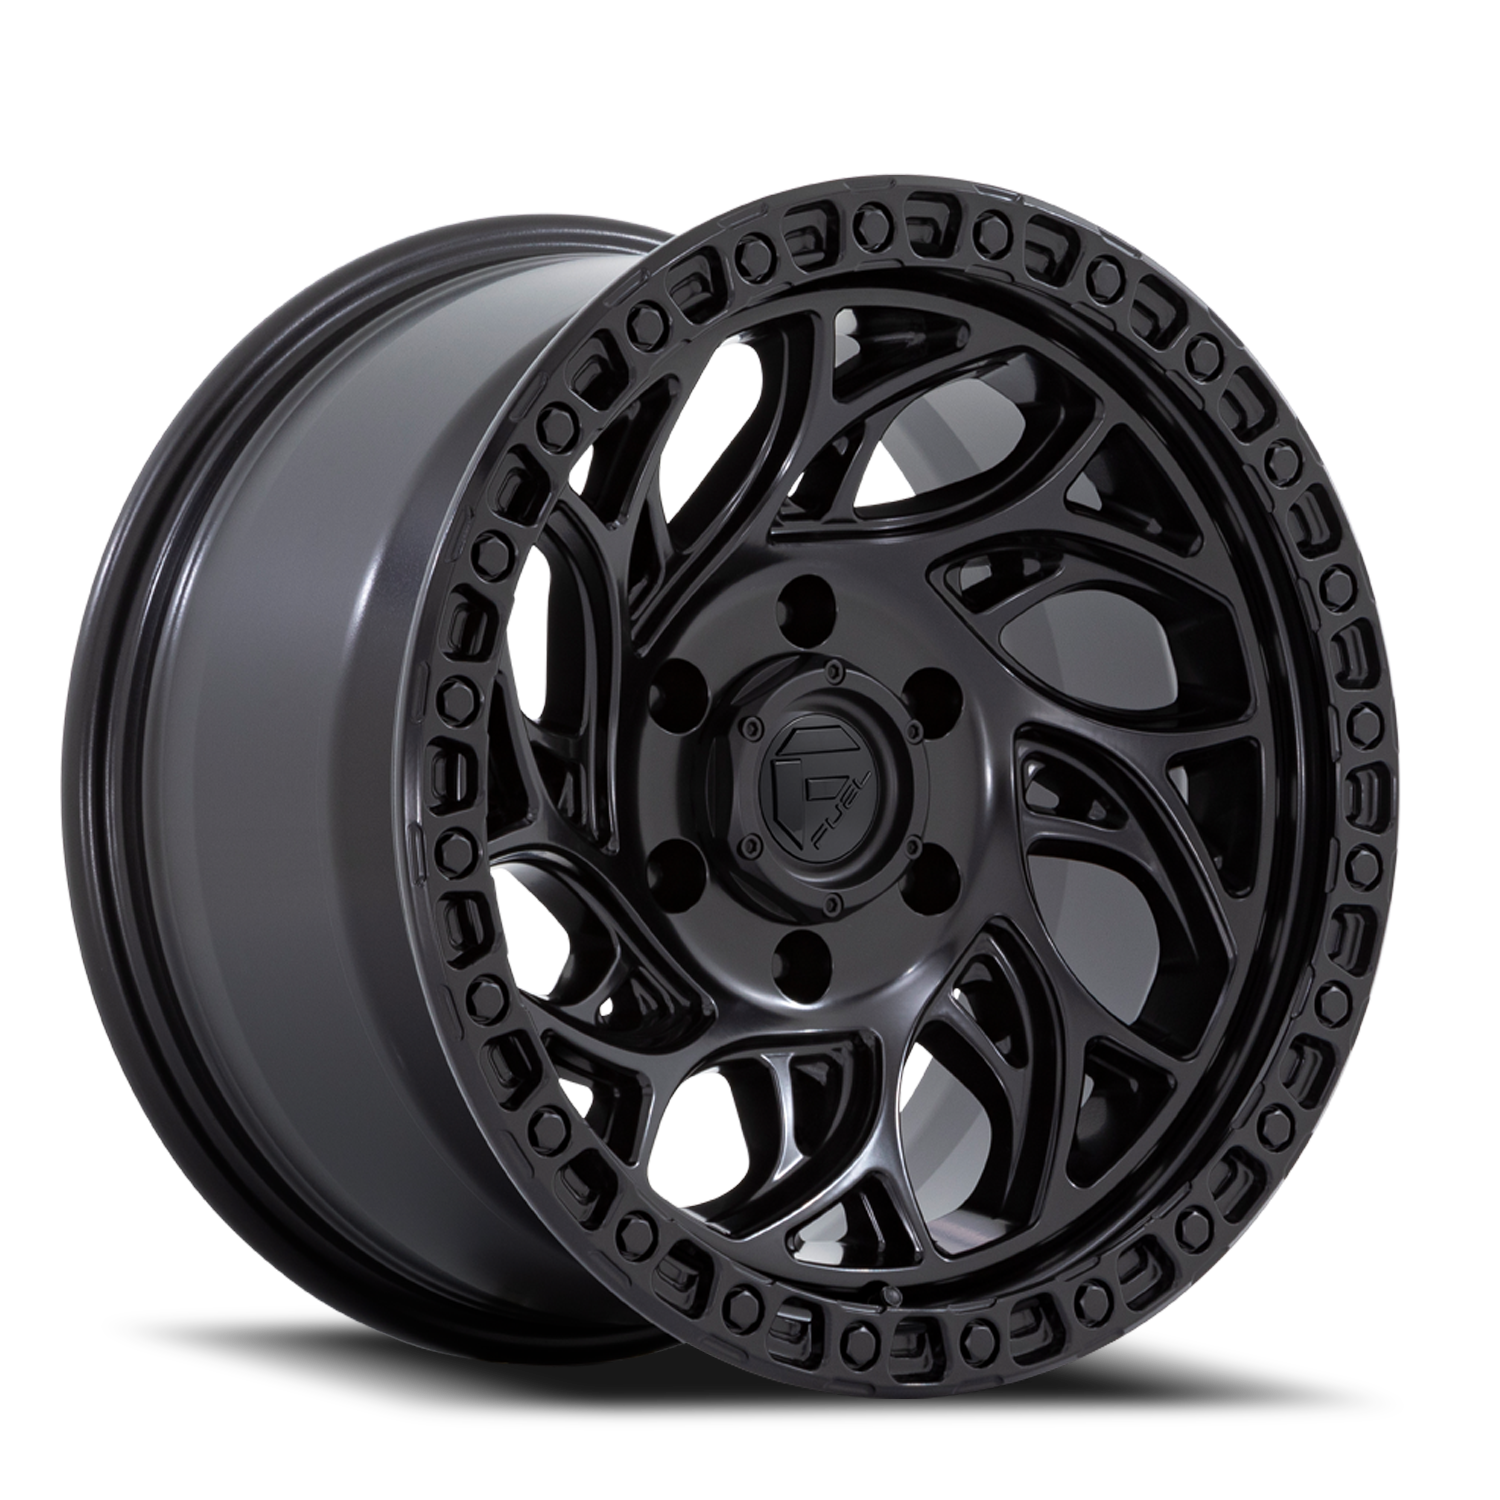 Aluminum Wheels 17X9 Runner OR D852 6 On 139.7 Blackout 106.1 Bore 1 Offset Fuel Off Road Wheels